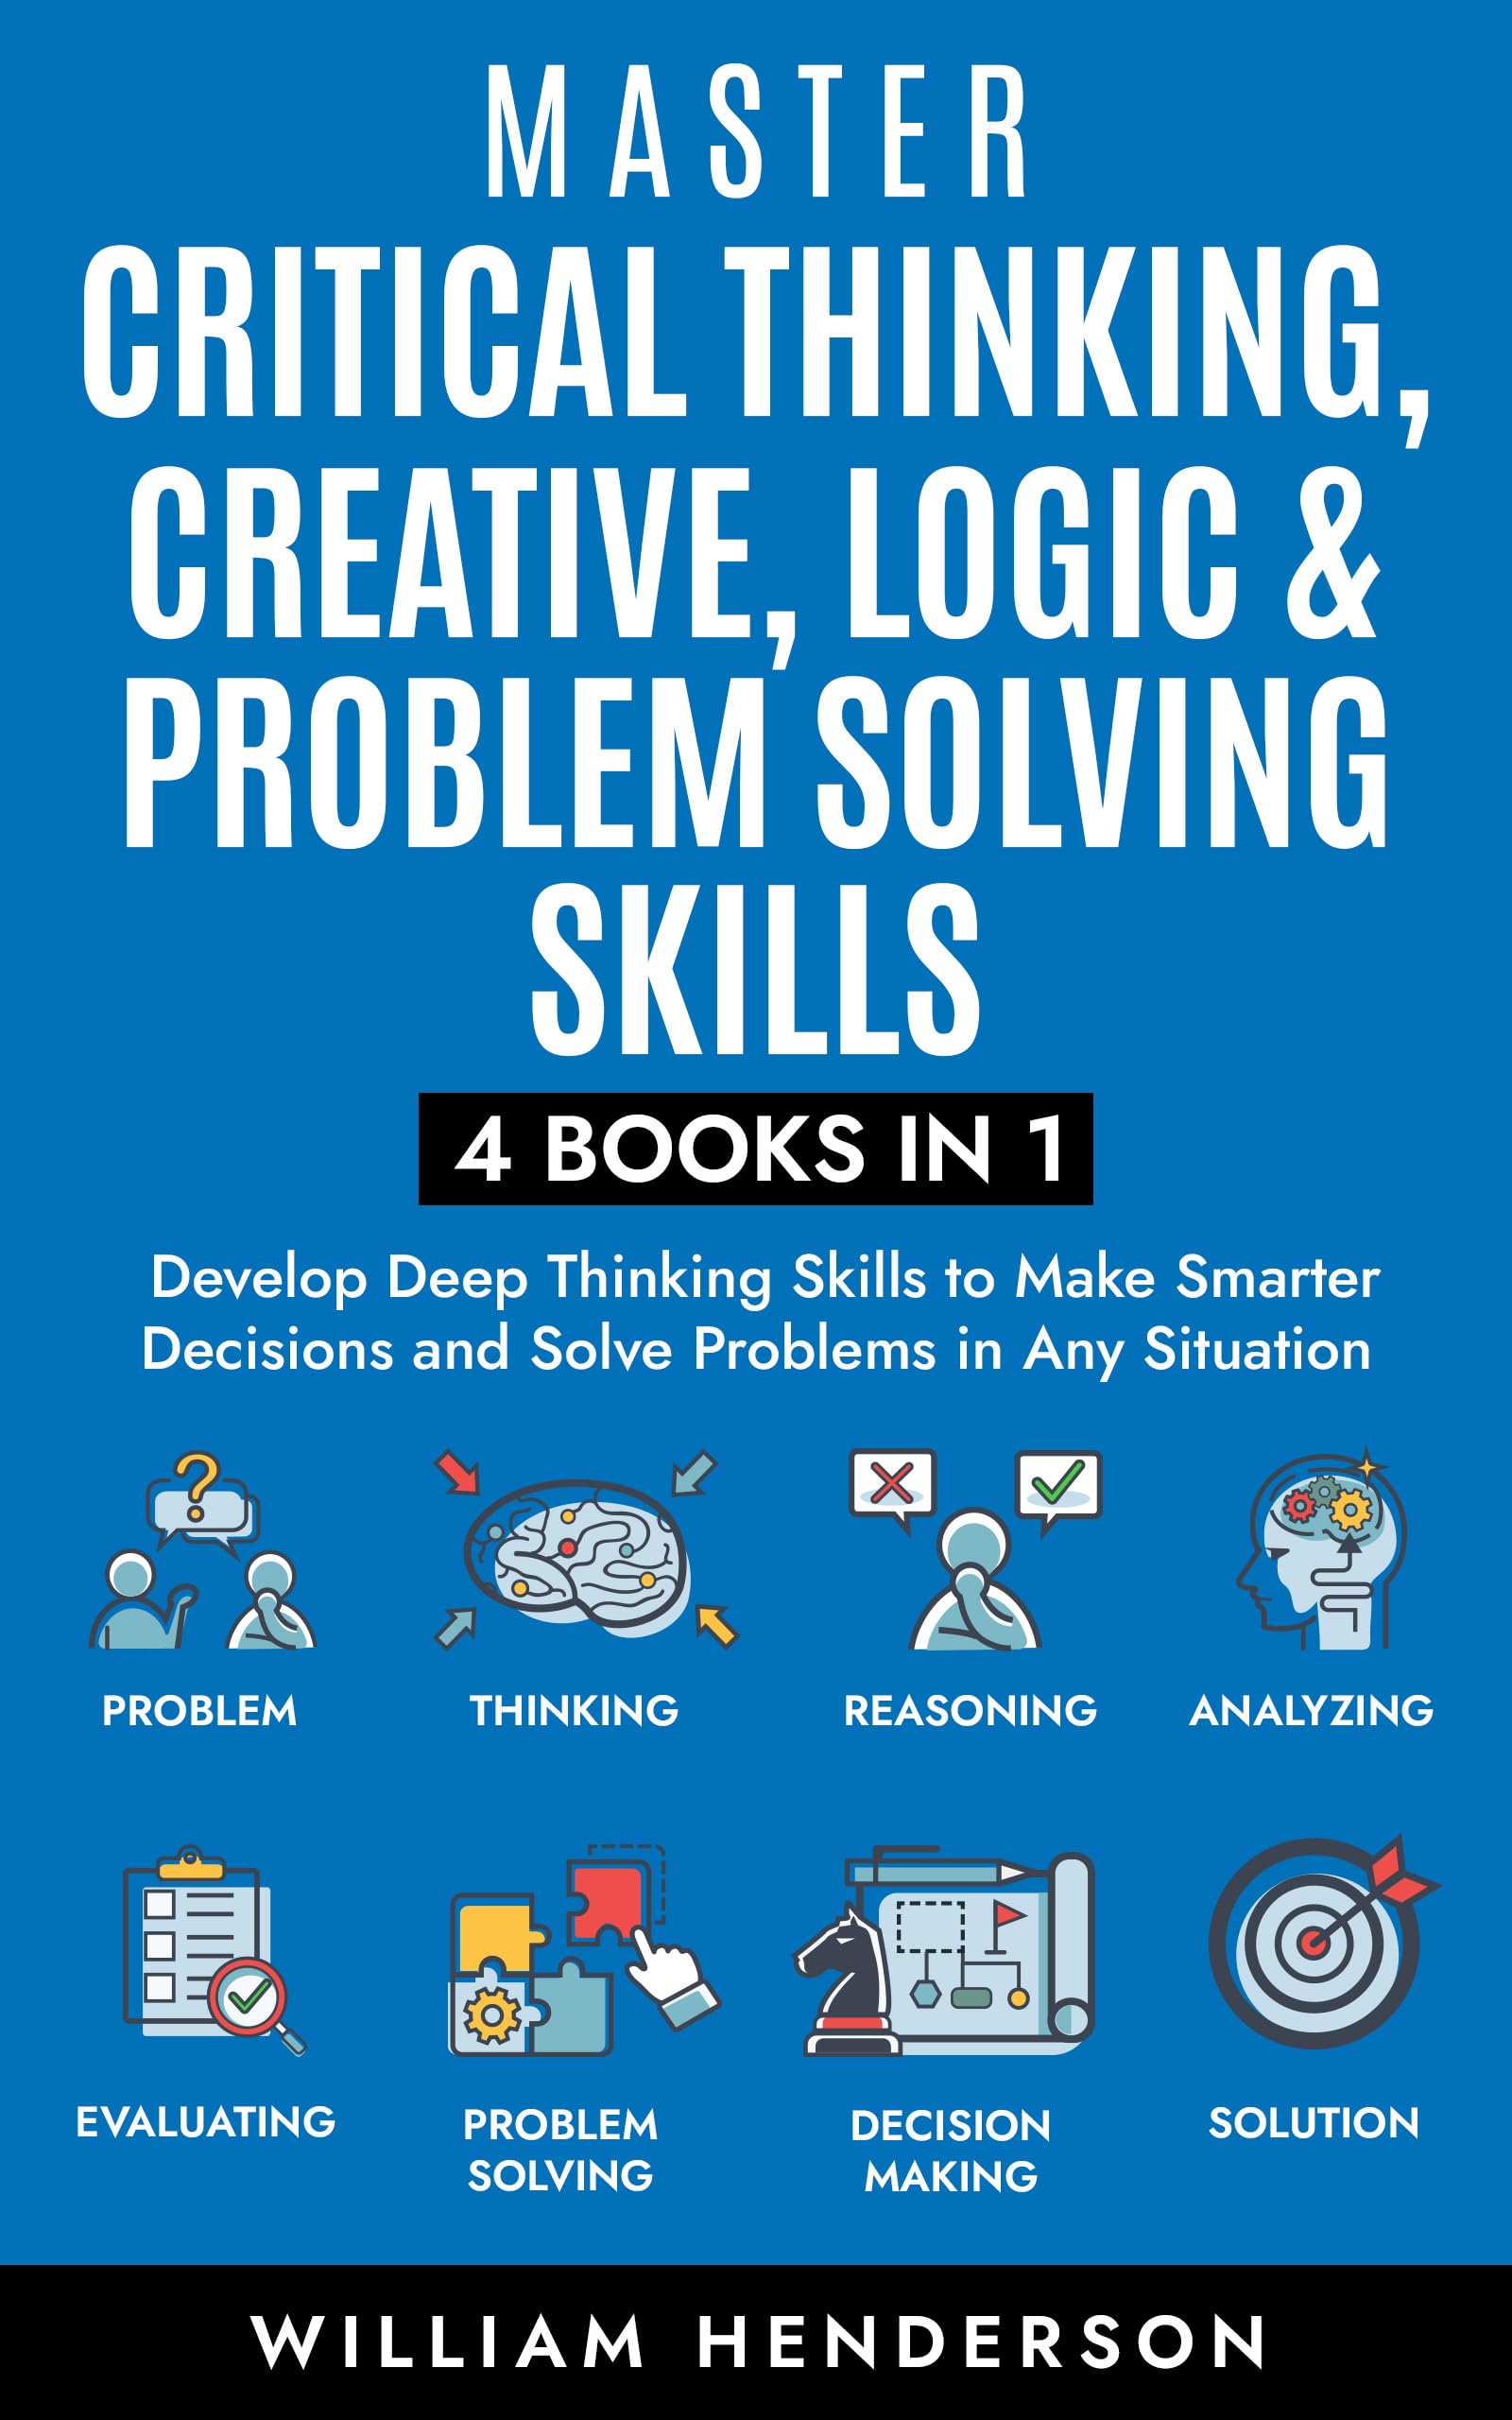 Master Critical Thinking, Creative, Logic & Problem Solving Skills (4 Books in 1) : Develop Deep Thinking Skills to Make Smarter Decisions and Solve Problems in Any Situation